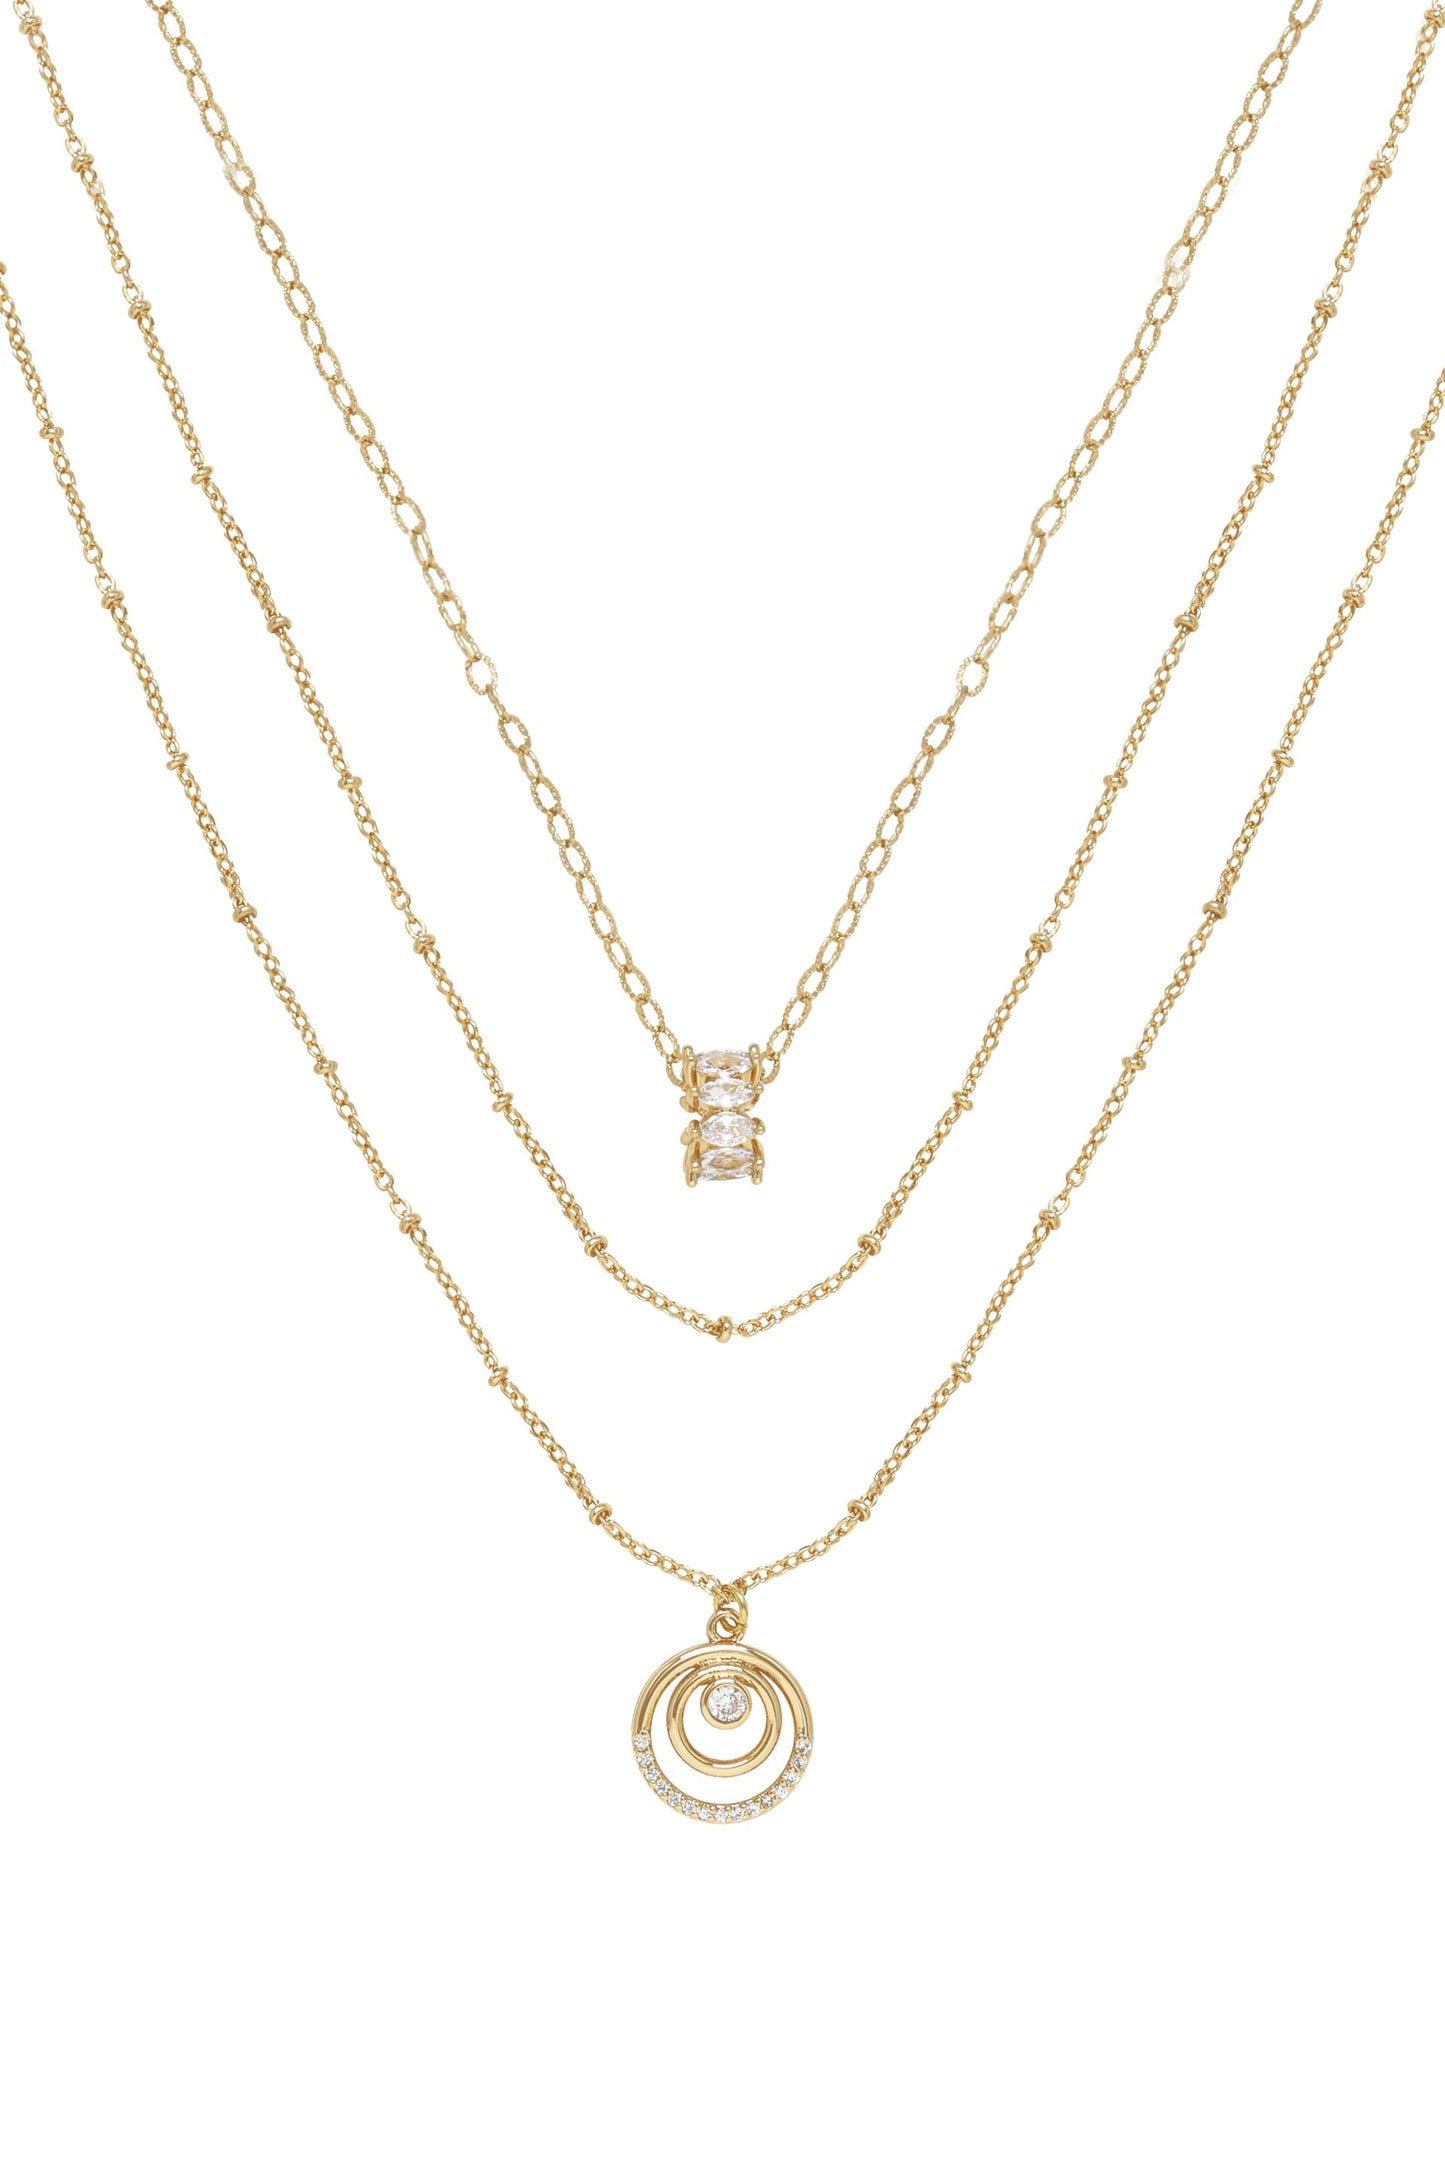 Circles of Crystal Dainty Layered 18k Gold Plated Necklace Set on white background  